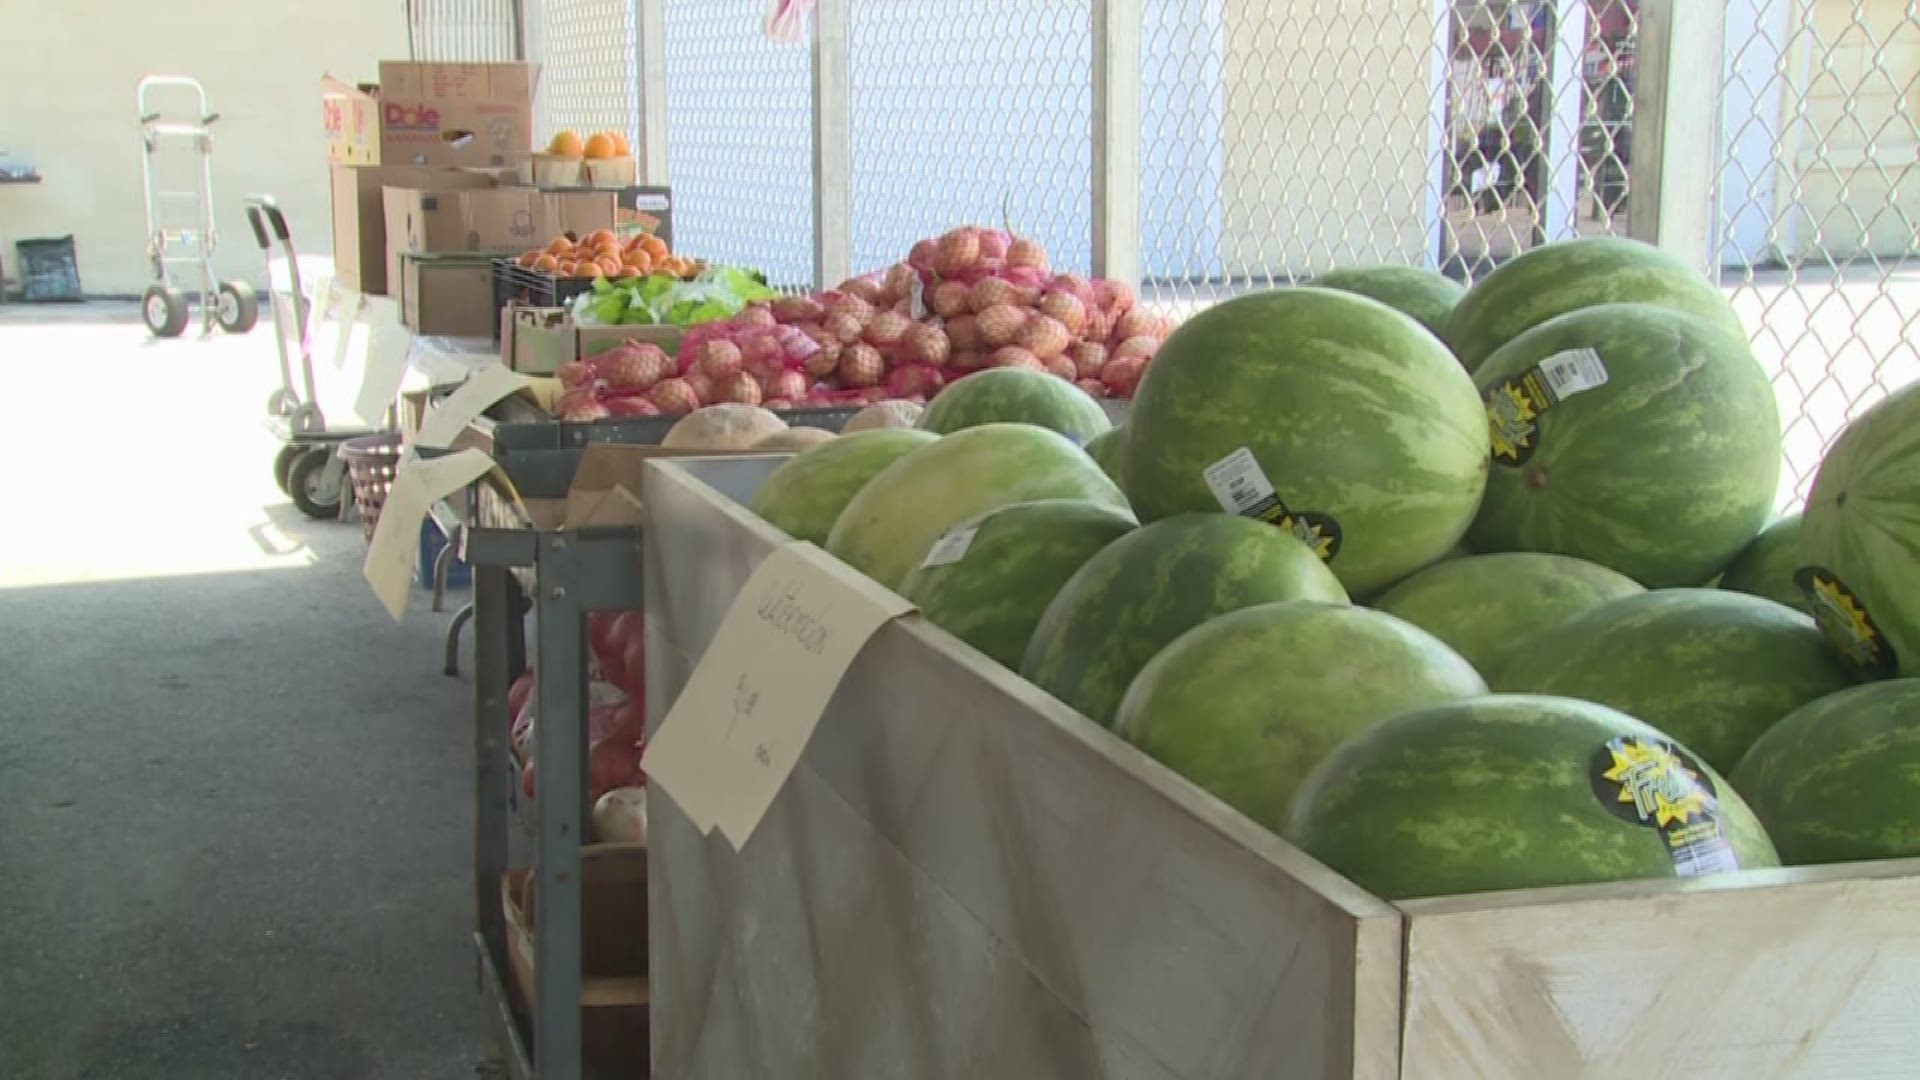 Produce stand opens in Old Louisville